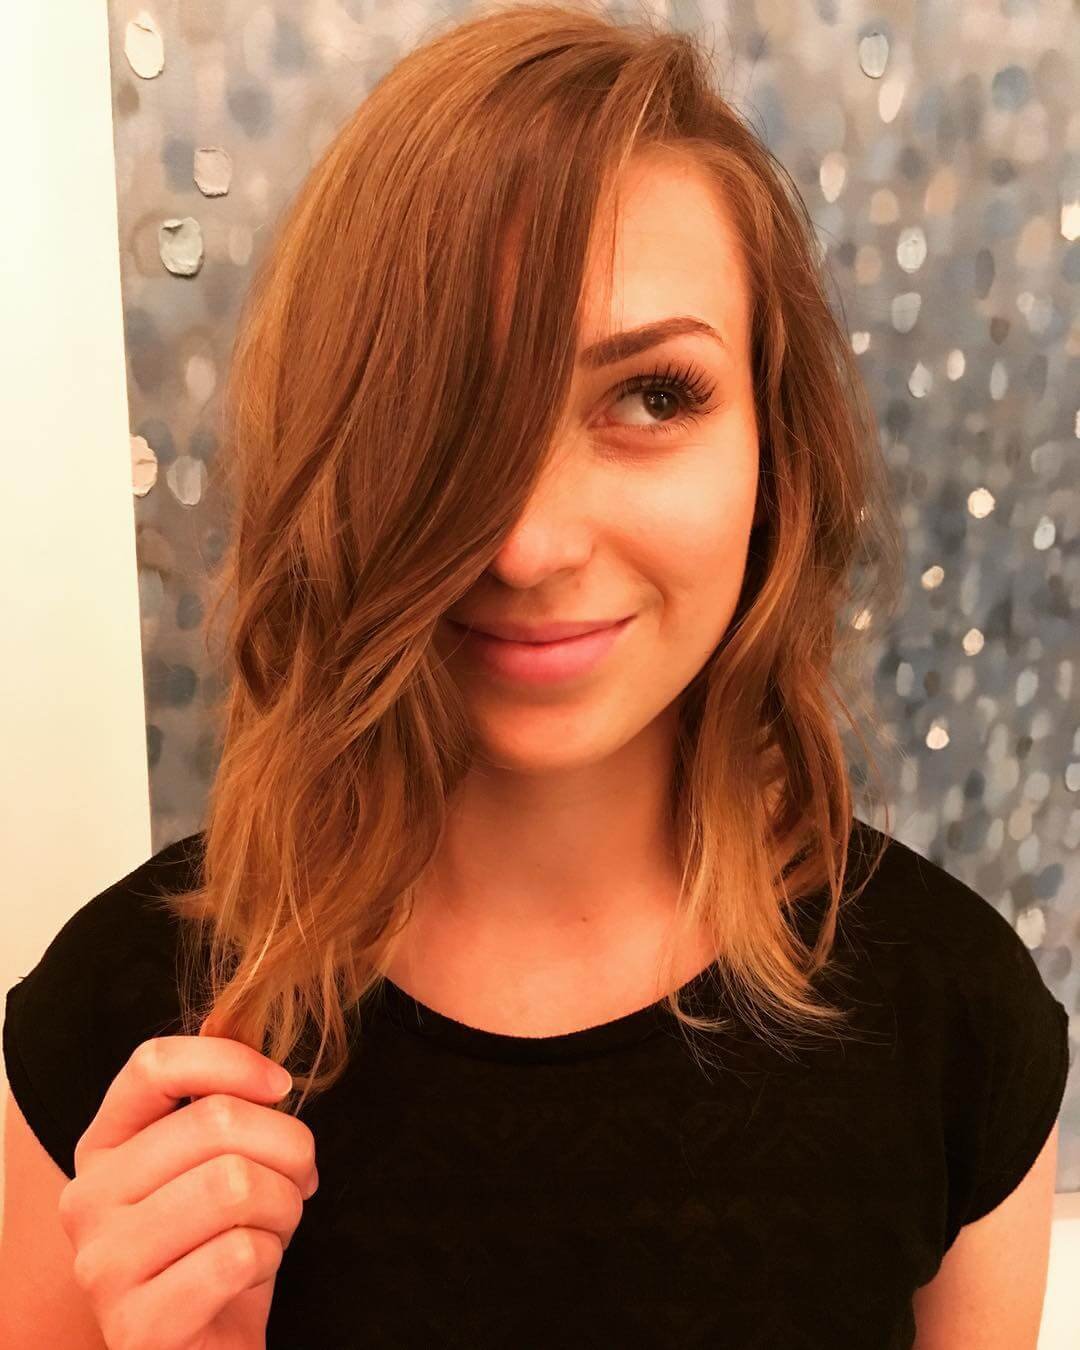 An angled choppy bob haircut with shorter hair at the back and longer hair towards the front, featuring choppy layers for a textured and trendy appearance